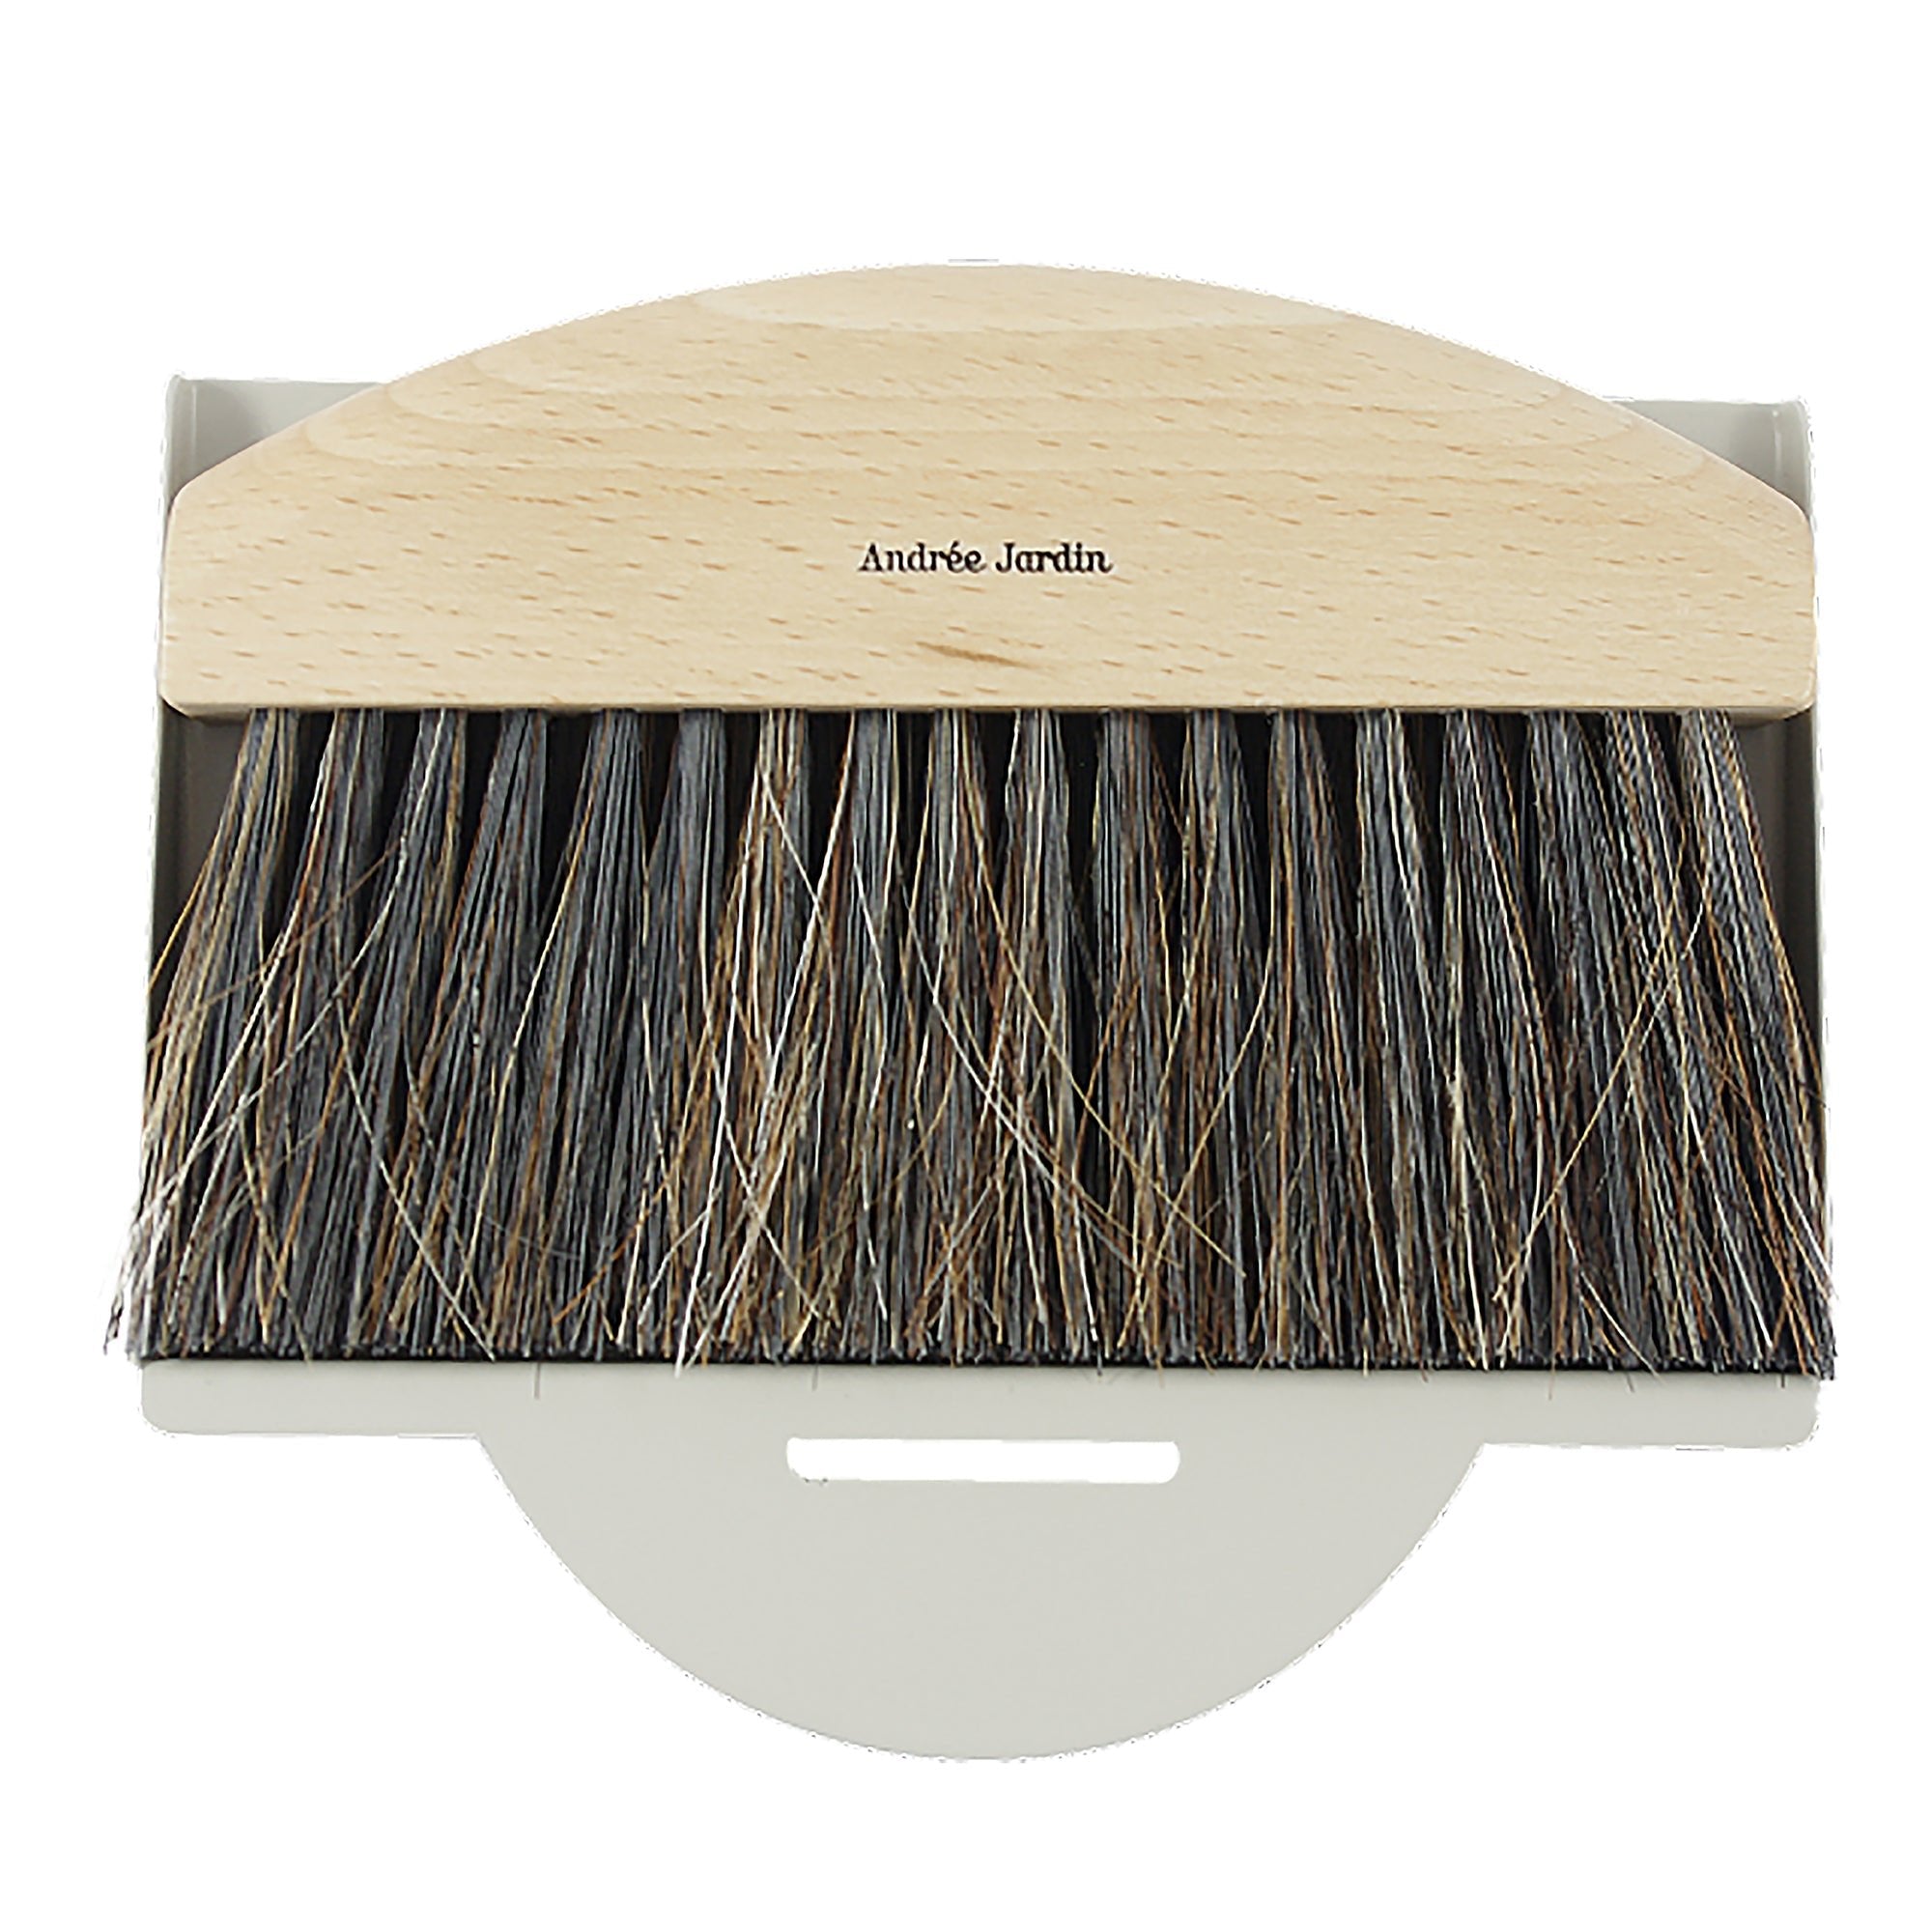 Andrée Jardin Mr. and Mrs. Clynk Mini Brush and Grey Dustpan Gift Set